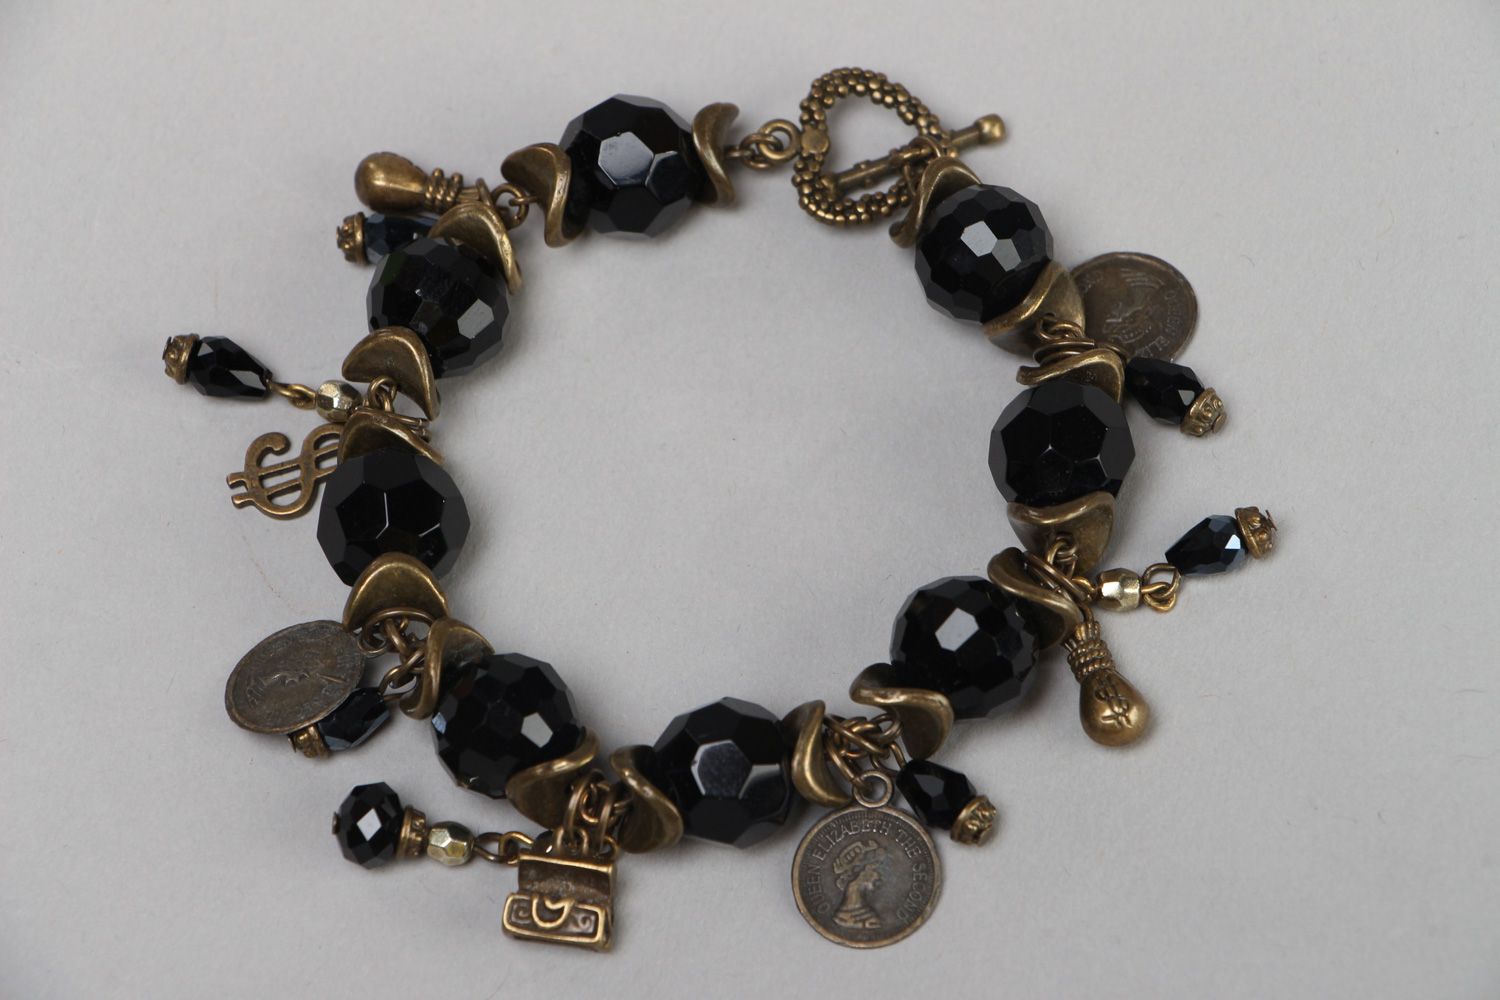 Handmade wrist bead bracelet with glass charms in dark color palette for women photo 2